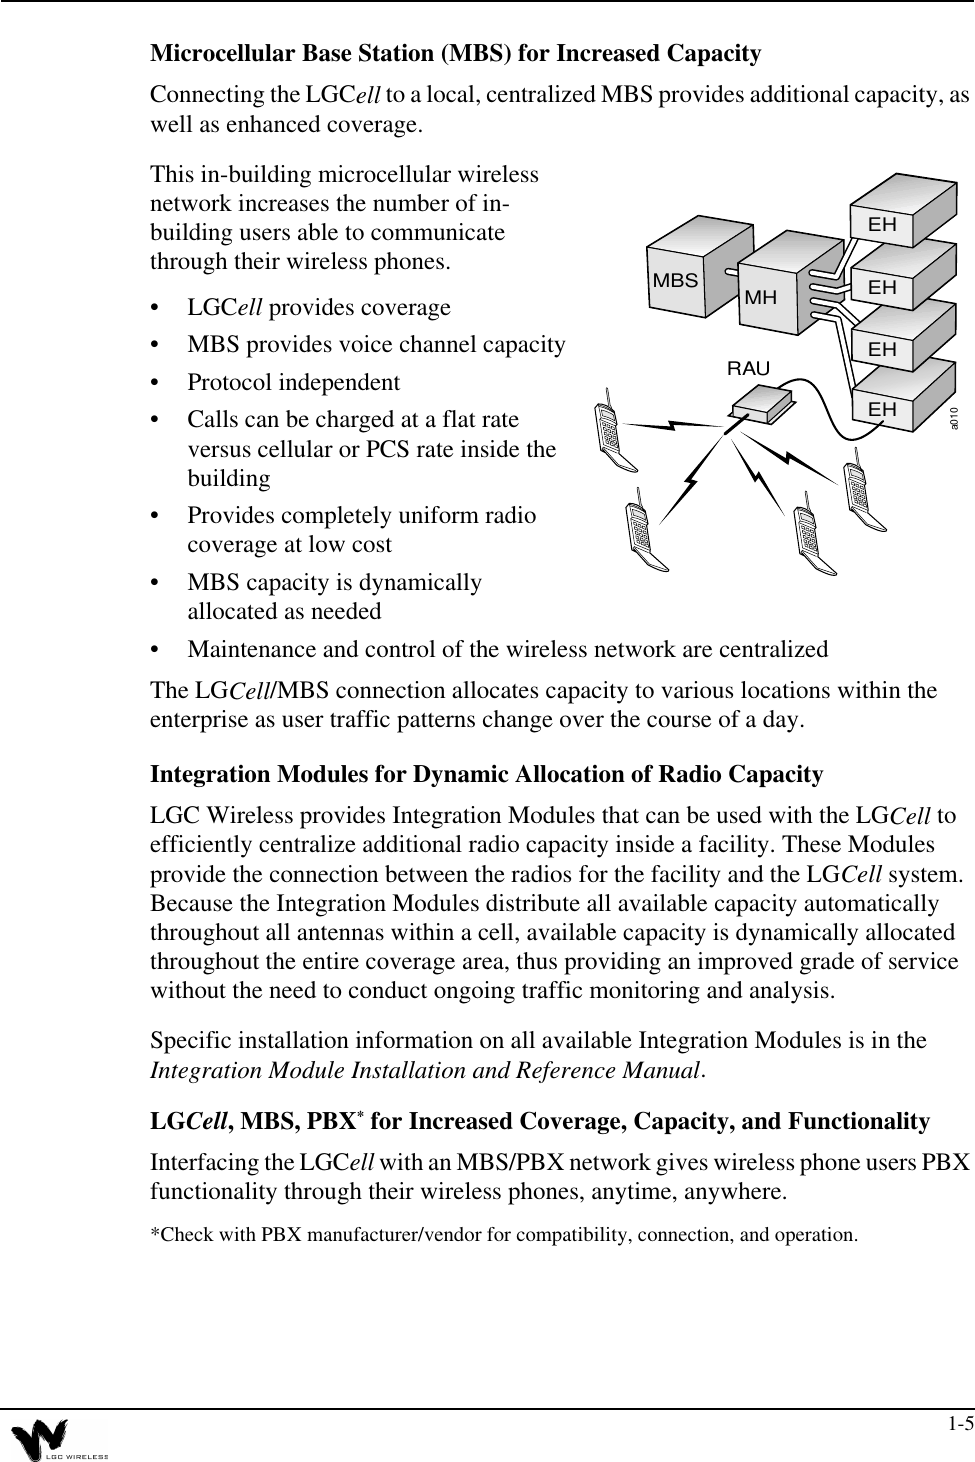 1-5Microcellular Base Station (MBS) for Increased CapacityConnecting the LGCell to a local, centralized MBS provides additional capacity, as well as enhanced coverage.This in-building microcellular wireless network increases the number of in-building users able to communicate through their wireless phones.• LGCell provides coverage• MBS provides voice channel capacity• Protocol independent• Calls can be charged at a flat rate versus cellular or PCS rate inside the building• Provides completely uniform radio coverage at low cost• MBS capacity is dynamically allocated as needed• Maintenance and control of the wireless network are centralizedThe LGCell/MBS connection allocates capacity to various locations within the enterprise as user traffic patterns change over the course of a day.Integration Modules for Dynamic Allocation of Radio CapacityLGC Wireless provides Integration Modules that can be used with the LGCell to efficiently centralize additional radio capacity inside a facility. These Modules provide the connection between the radios for the facility and the LGCell system. Because the Integration Modules distribute all available capacity automatically throughout all antennas within a cell, available capacity is dynamically allocated throughout the entire coverage area, thus providing an improved grade of service without the need to conduct ongoing traffic monitoring and analysis.Specific installation information on all available Integration Modules is in the Integration Module Installation and Reference Manual. LGCell, MBS, PBX* for Increased Coverage, Capacity, and FunctionalityInterfacing the LGCell with an MBS/PBX network gives wireless phone users PBX functionality through their wireless phones, anytime, anywhere.*Check with PBX manufacturer/vendor for compatibility, connection, and operation.a010MBS MHEHEHEHEHRAU